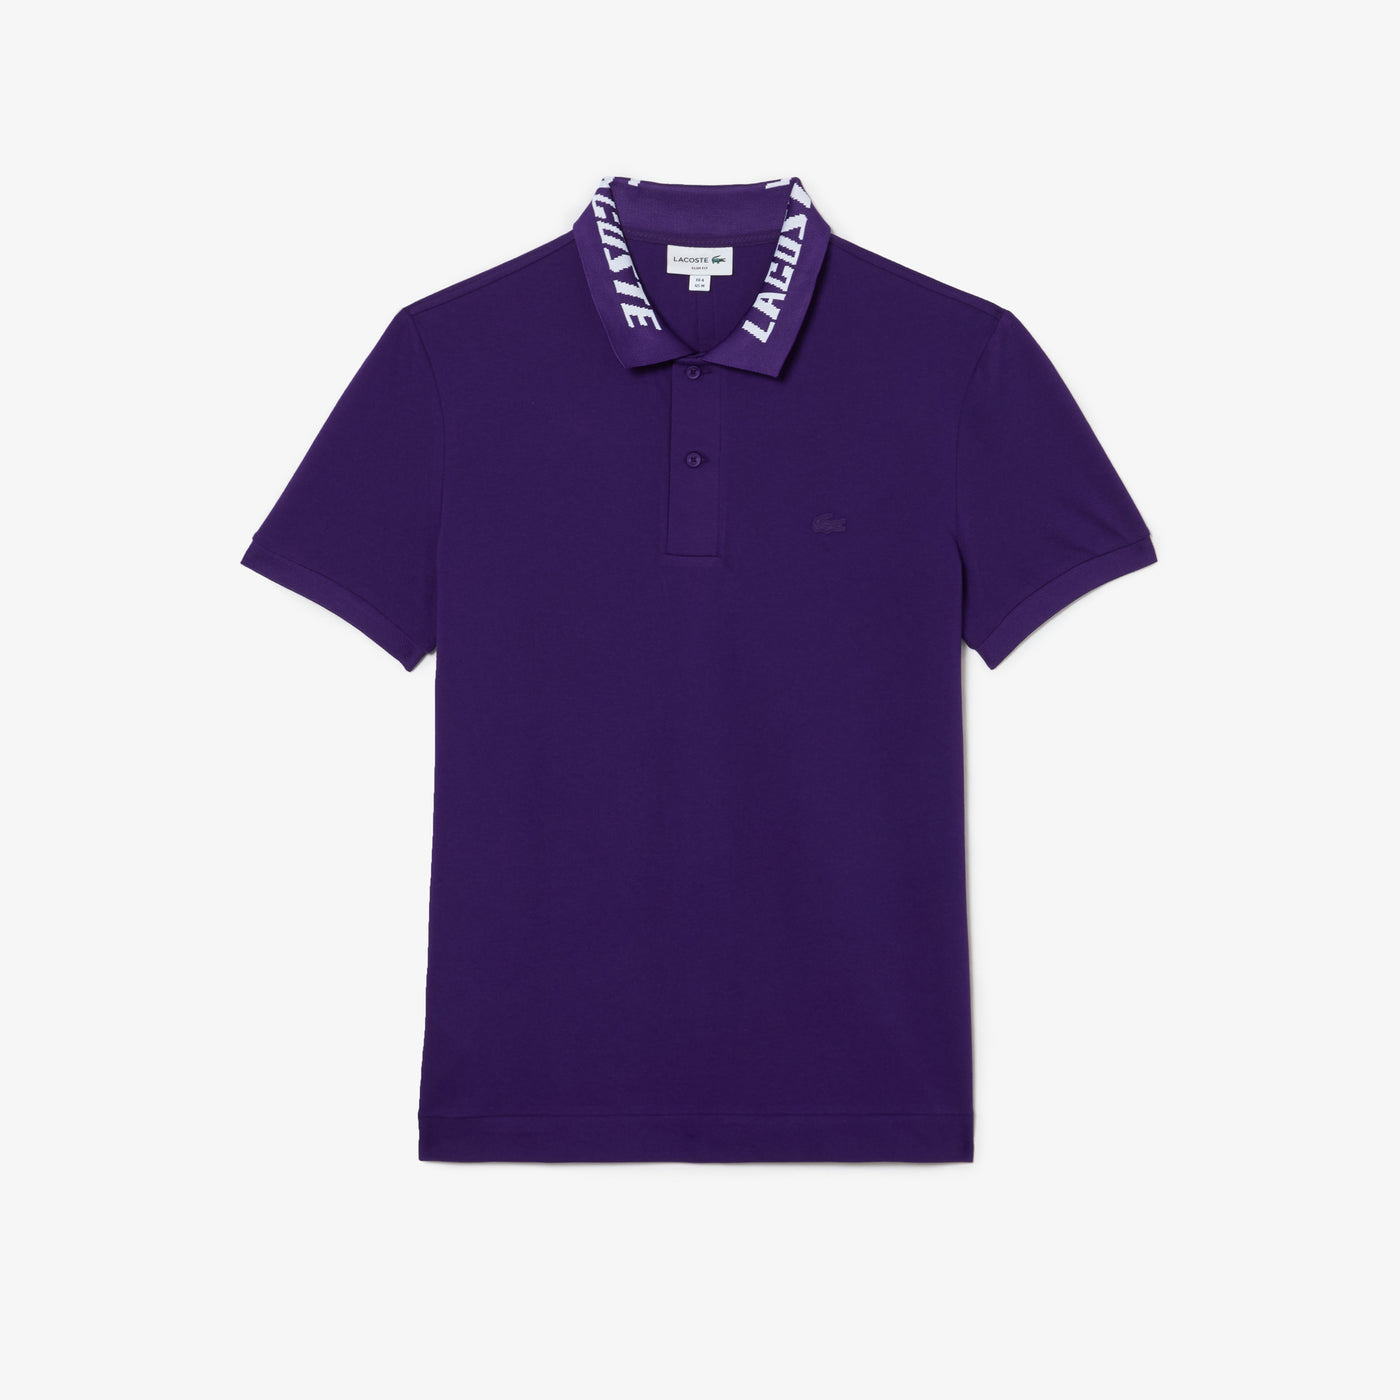 Shop The Latest Collection Of Lacoste Men'S Lacoste Branded Slim Fit Stretch Piquã© Polo - Ph9642 In Lebanon